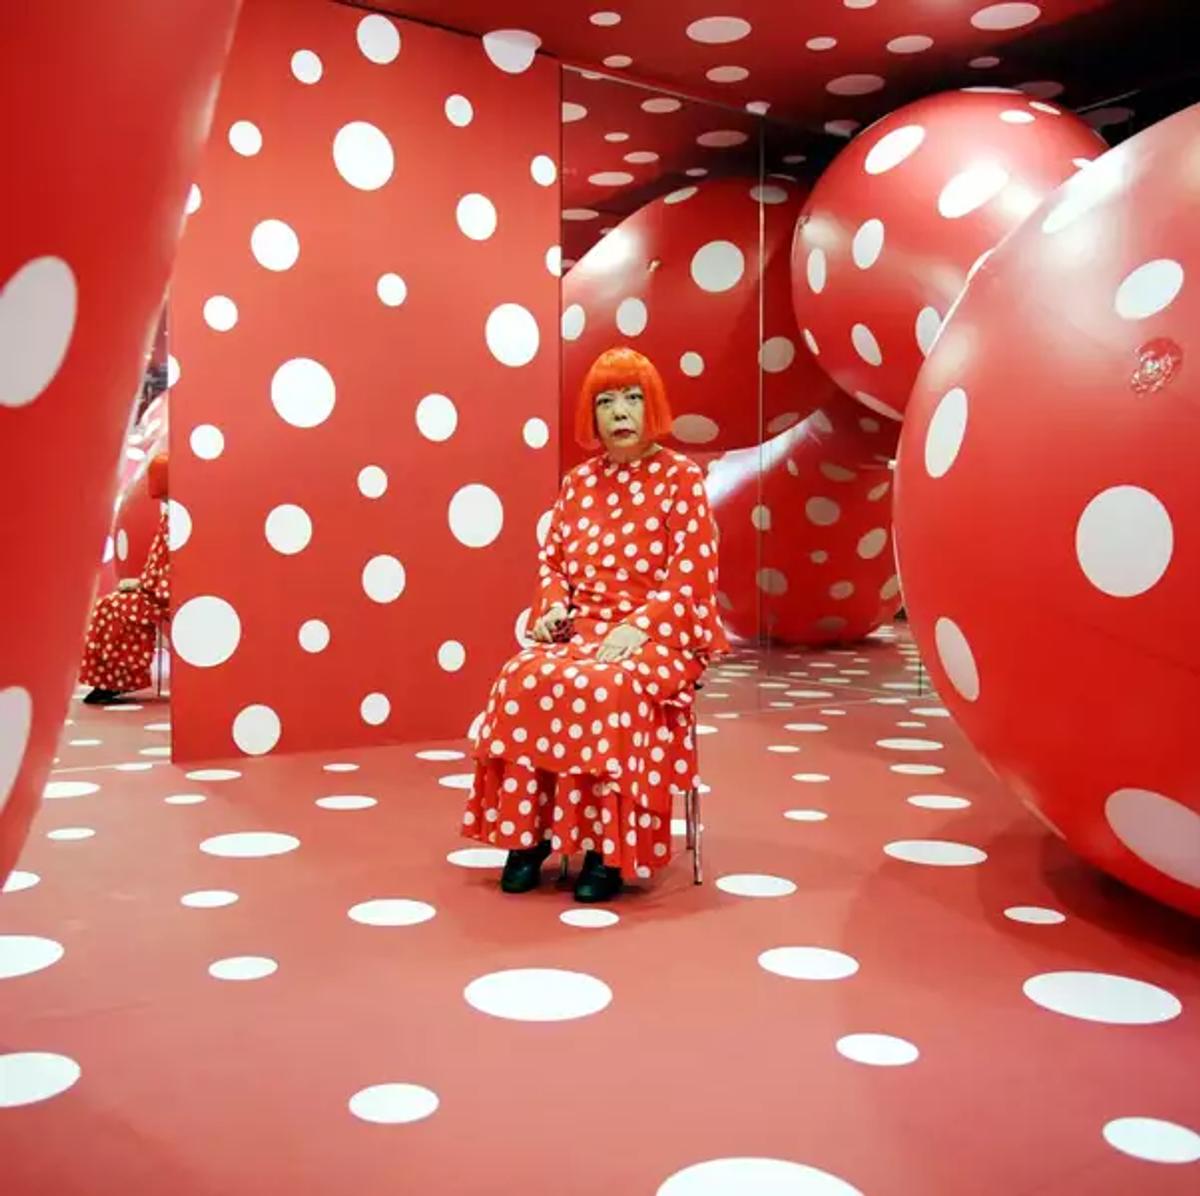 Yayoi Kusama and her art obsession with Polka Dots